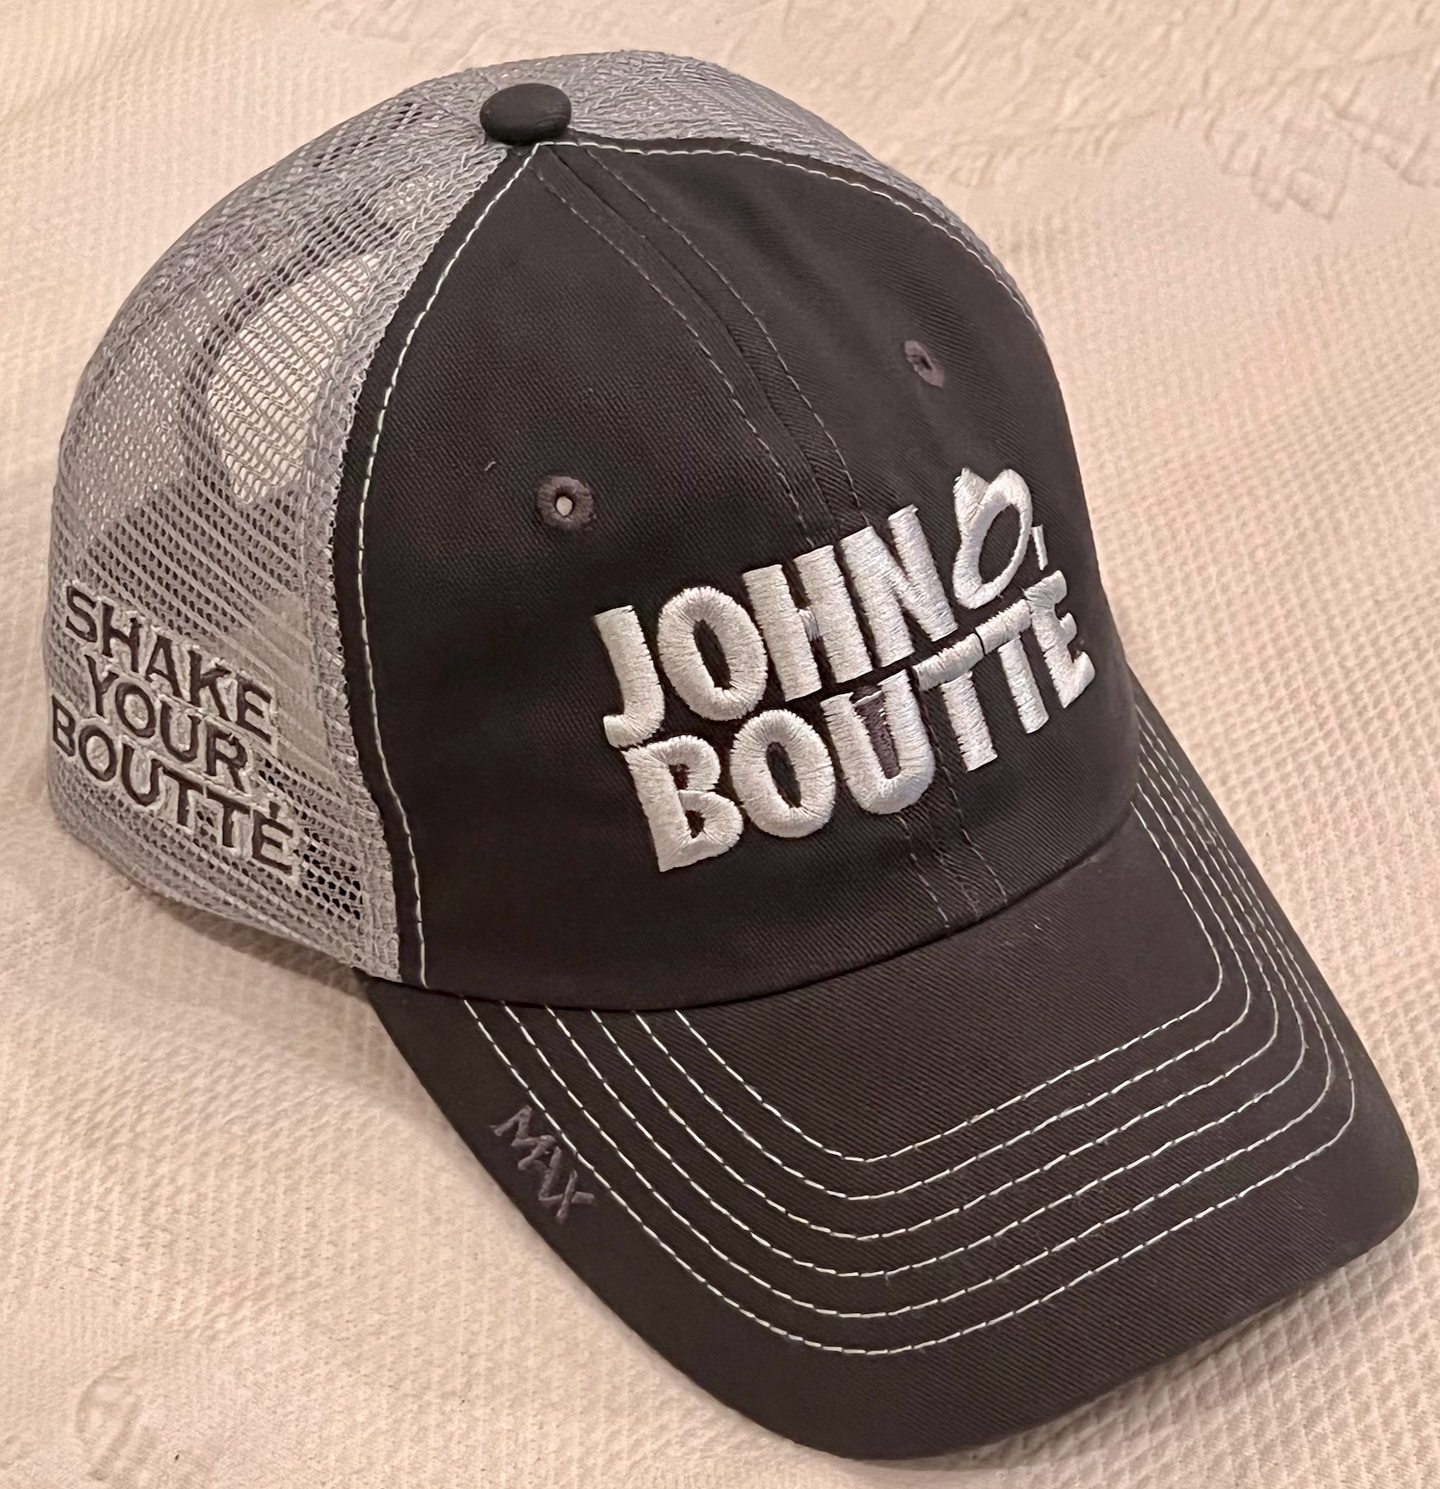 John Boutte´ hats w/ 3 embroidered logos